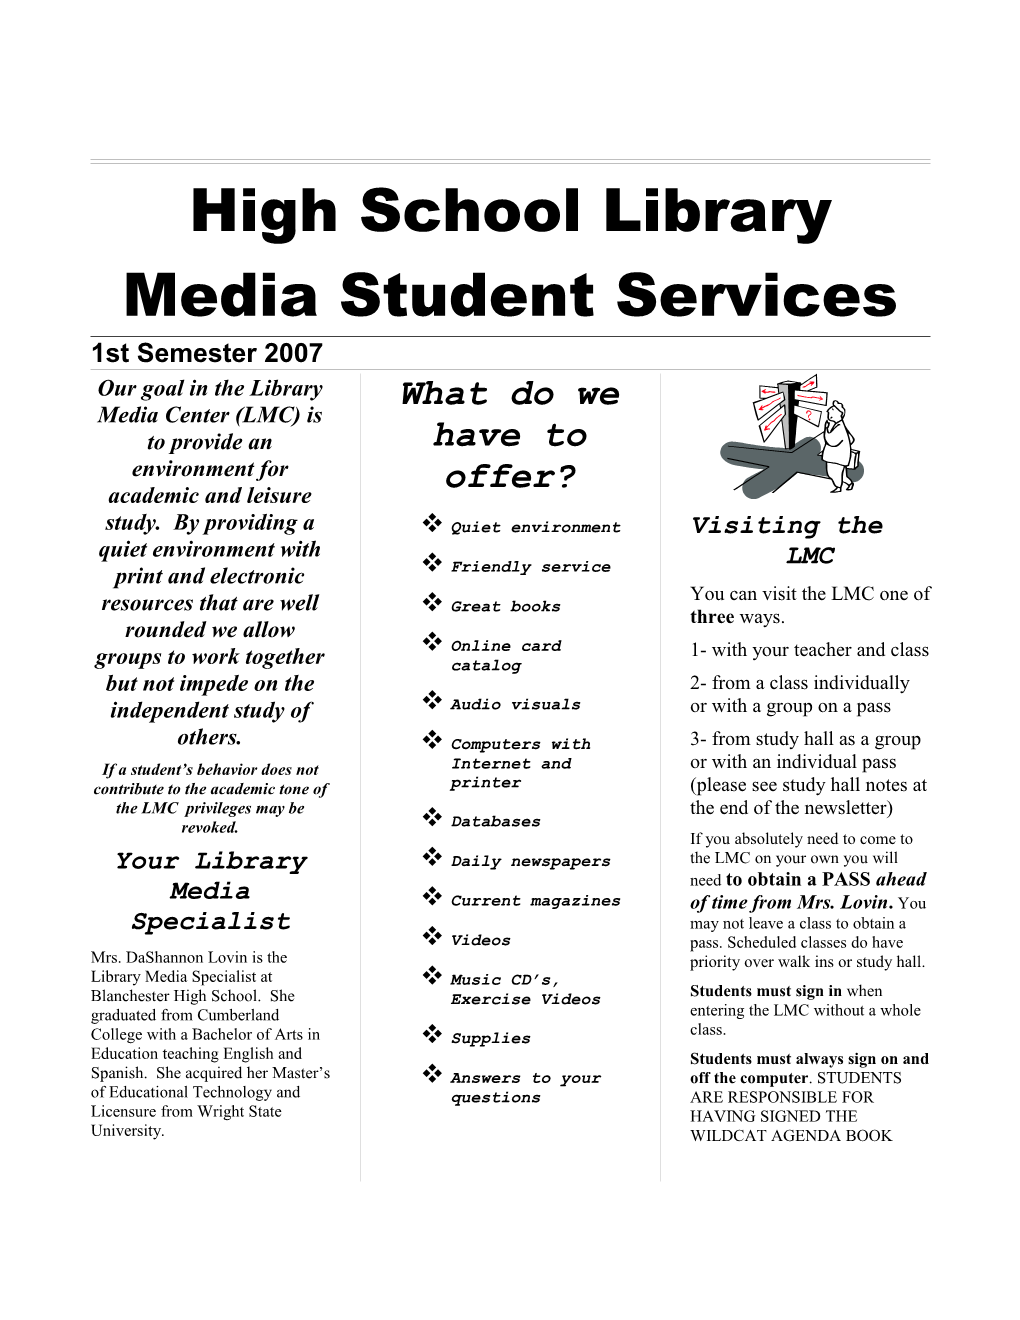 High School Library Media Student Services